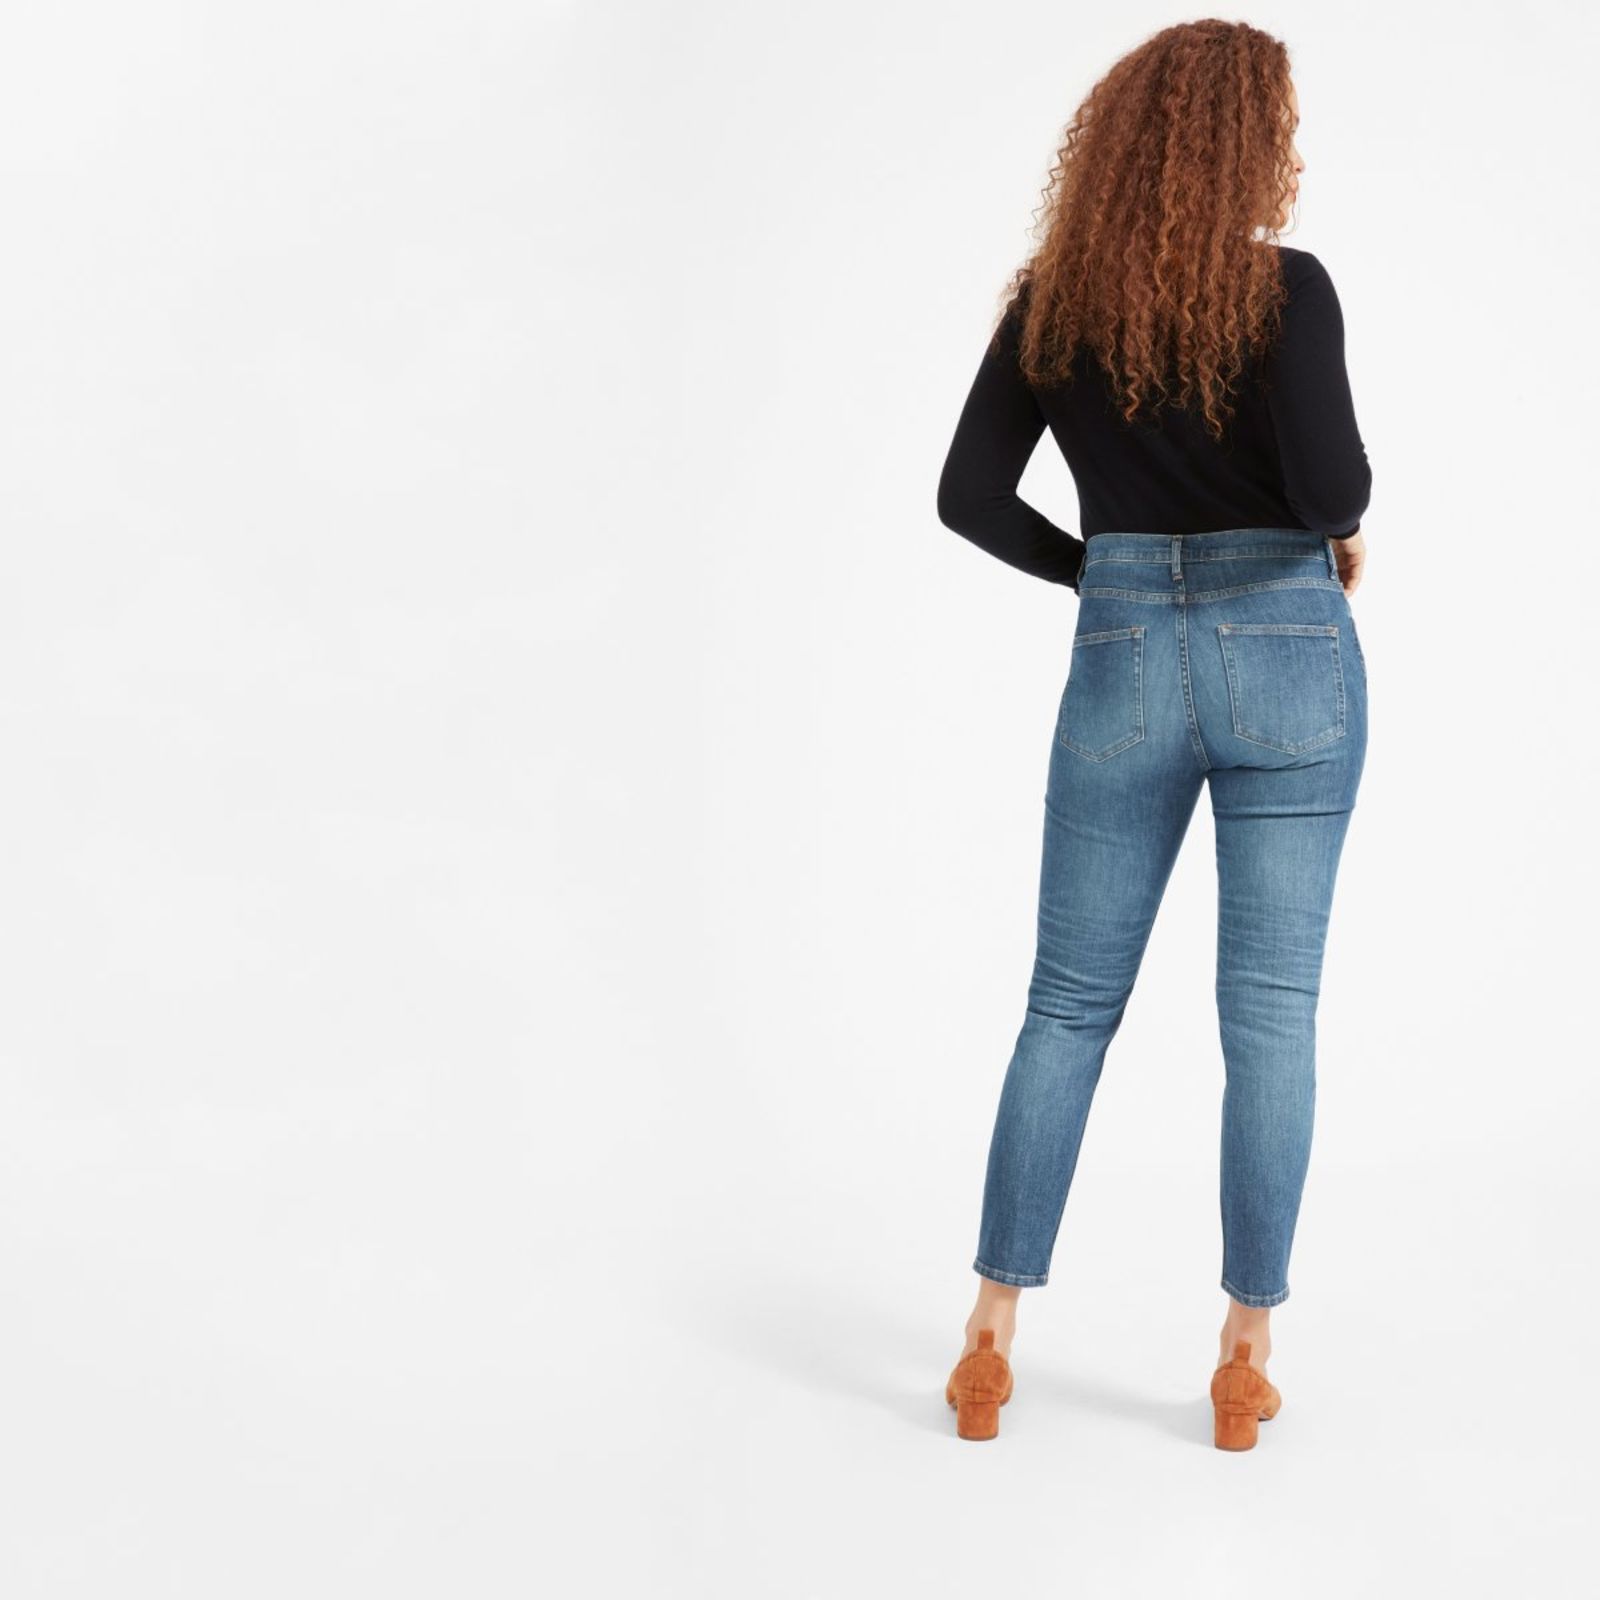 Women's High-Rise Skinny Jean by Everlane in Mid Blue, Size 24 | Everlane